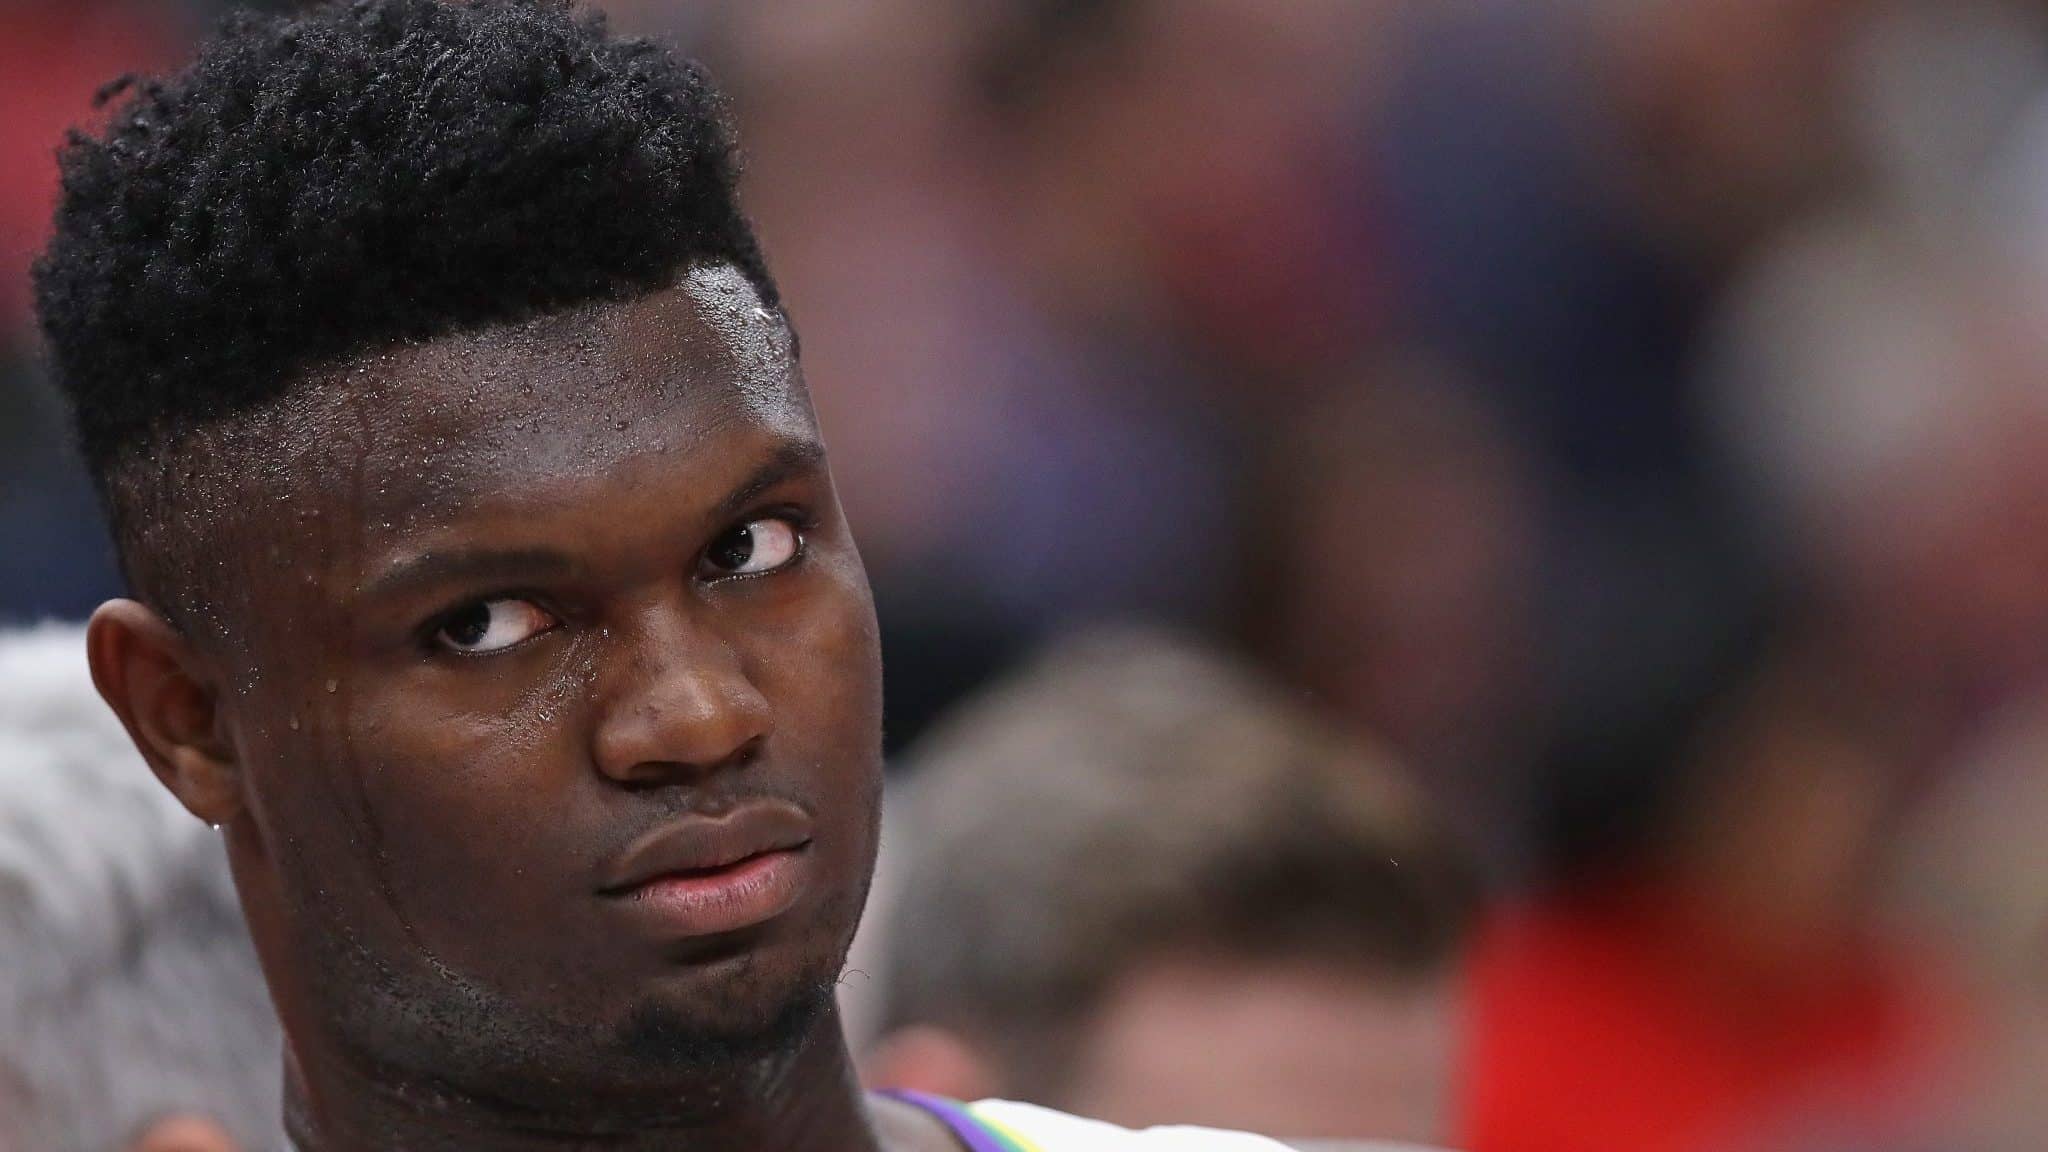 CHICAGO, ILLINOIS - FEBRUARY 06: Zion Williamson #1 of the New Orleans Pelicans watches from the bench as teammates take on the Chicago Bulls at the United Center on February 06, 2020 in Chicago, Illinois. NOTE TO USER: User expressly acknowledges and agrees that, by downloading and or using this photograph, User is consenting to the terms and conditions of the Getty Images License Agreement.